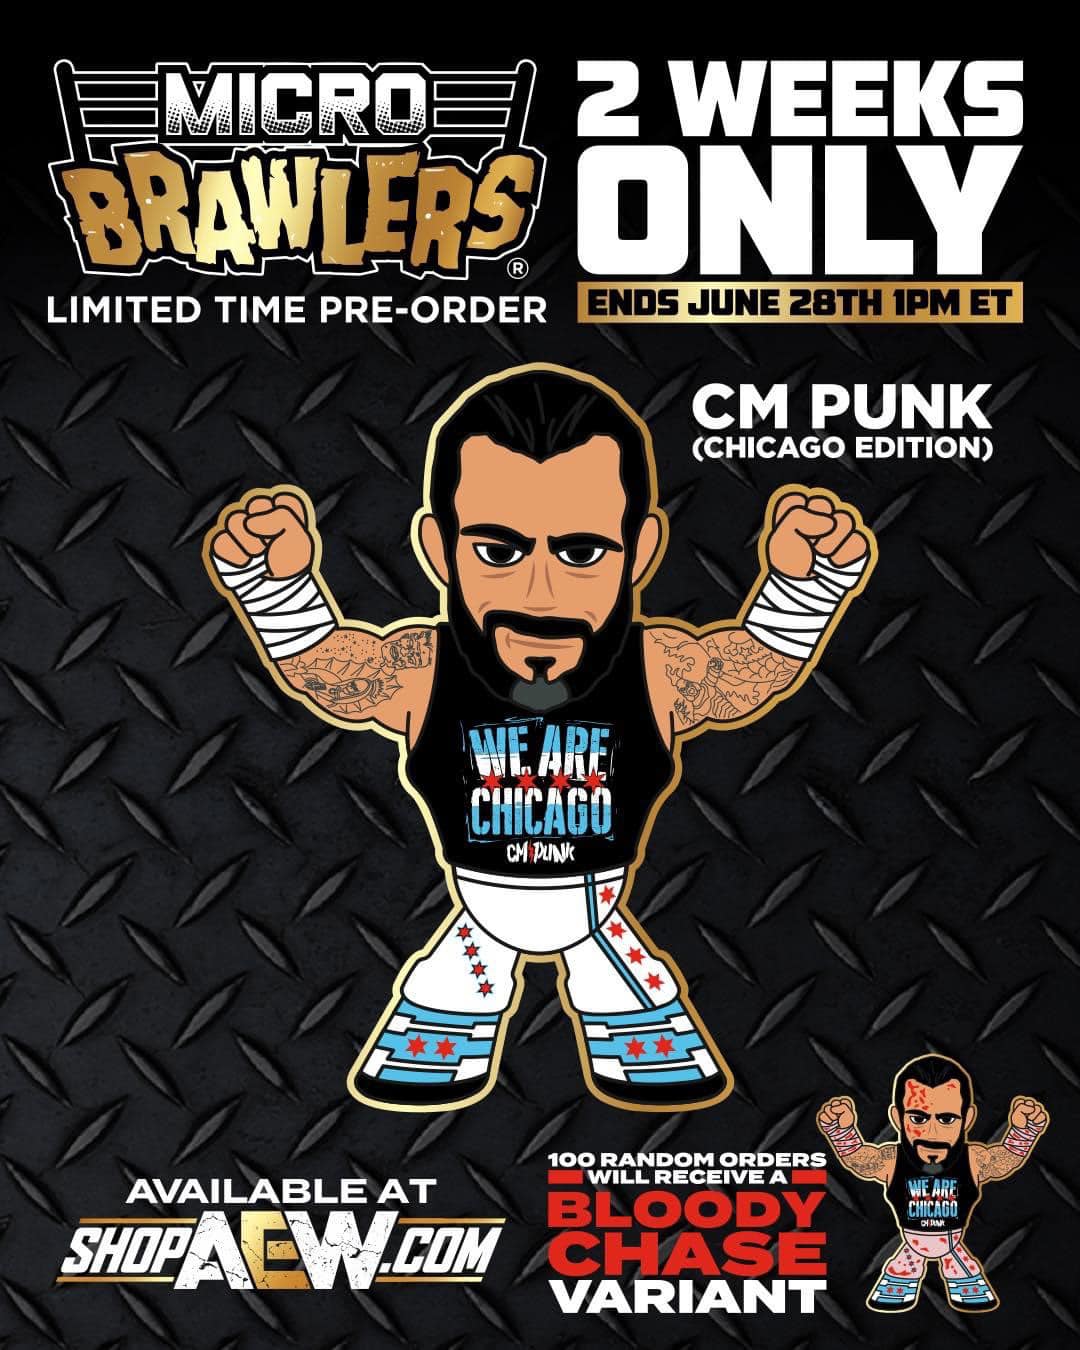 All Elite Wrestling - AEW MICRO BRAWLERS - Wave 1 1 week pre-order starts  TOMORROW at 8pm EST and ends Feb 18th at 1pm EST Available at SHOPAEW.com  Get your AEW micro